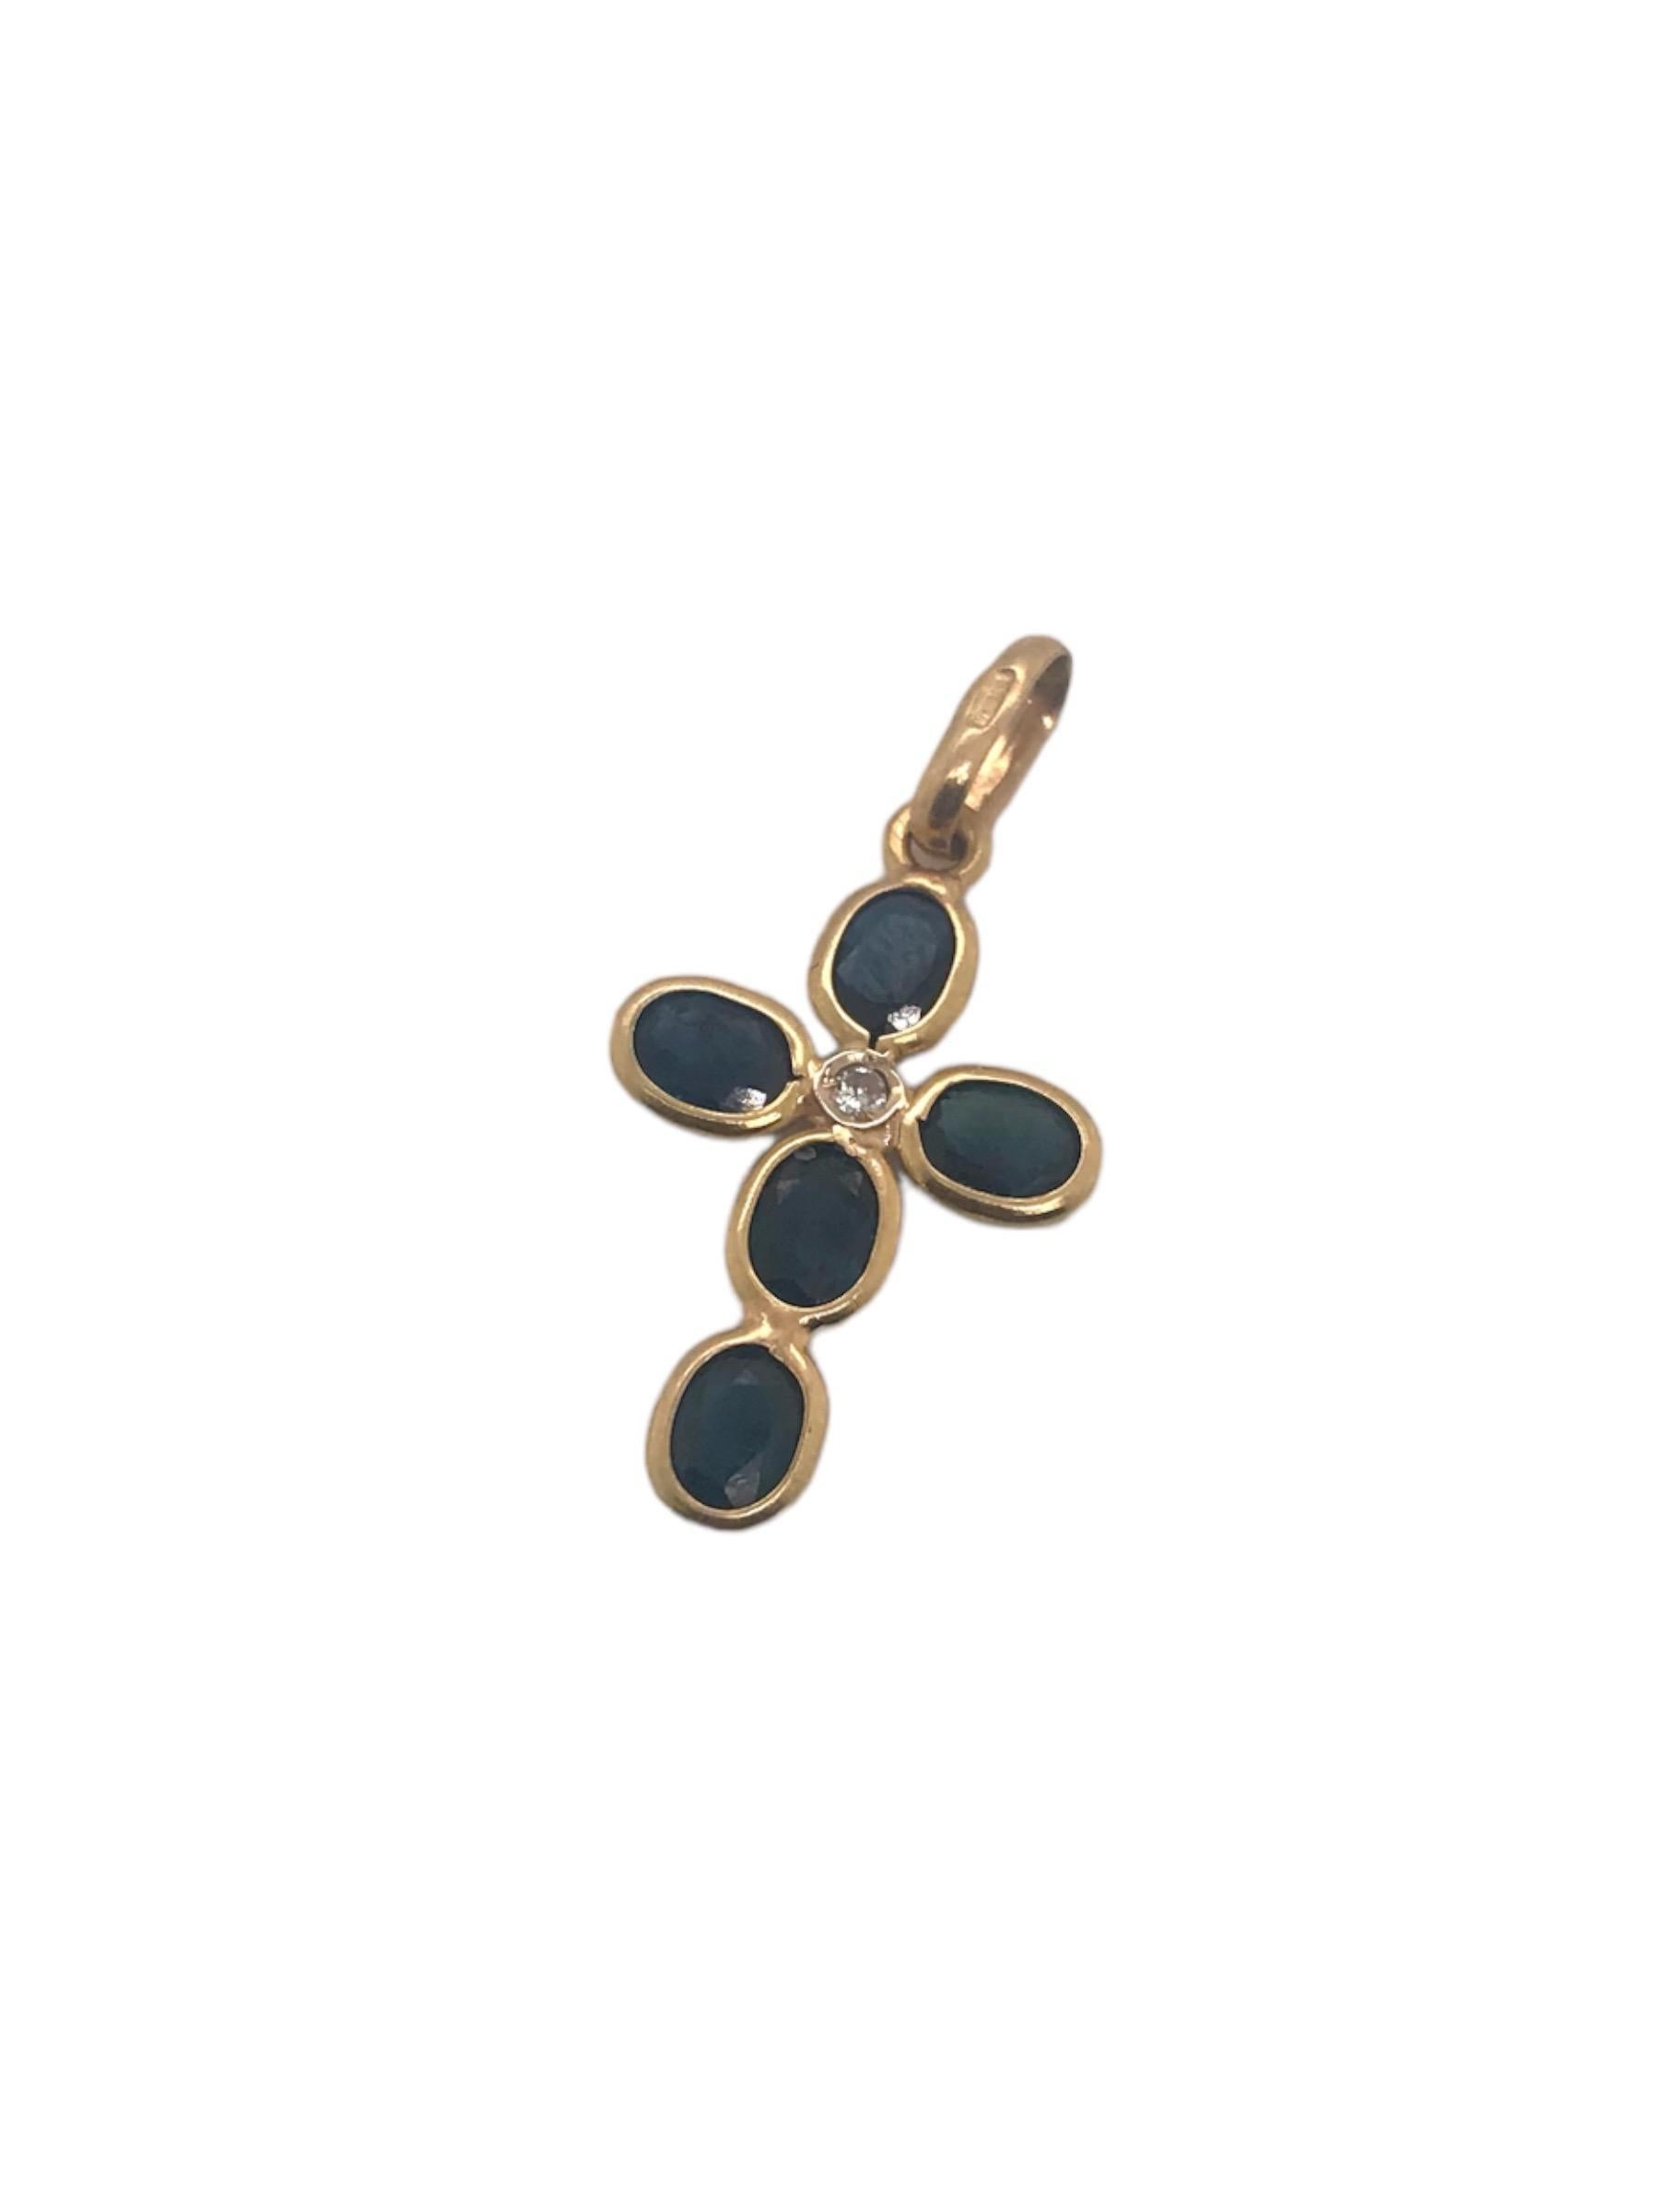 This Contemporary piece is cute & simple. Absolutely perfect for every day! 
Crafted in 18K Yellow Gold and accented with 5 natural sapphires, approximately 2.5 carats combined weight, and 1 natural diamond, approximately 0.01